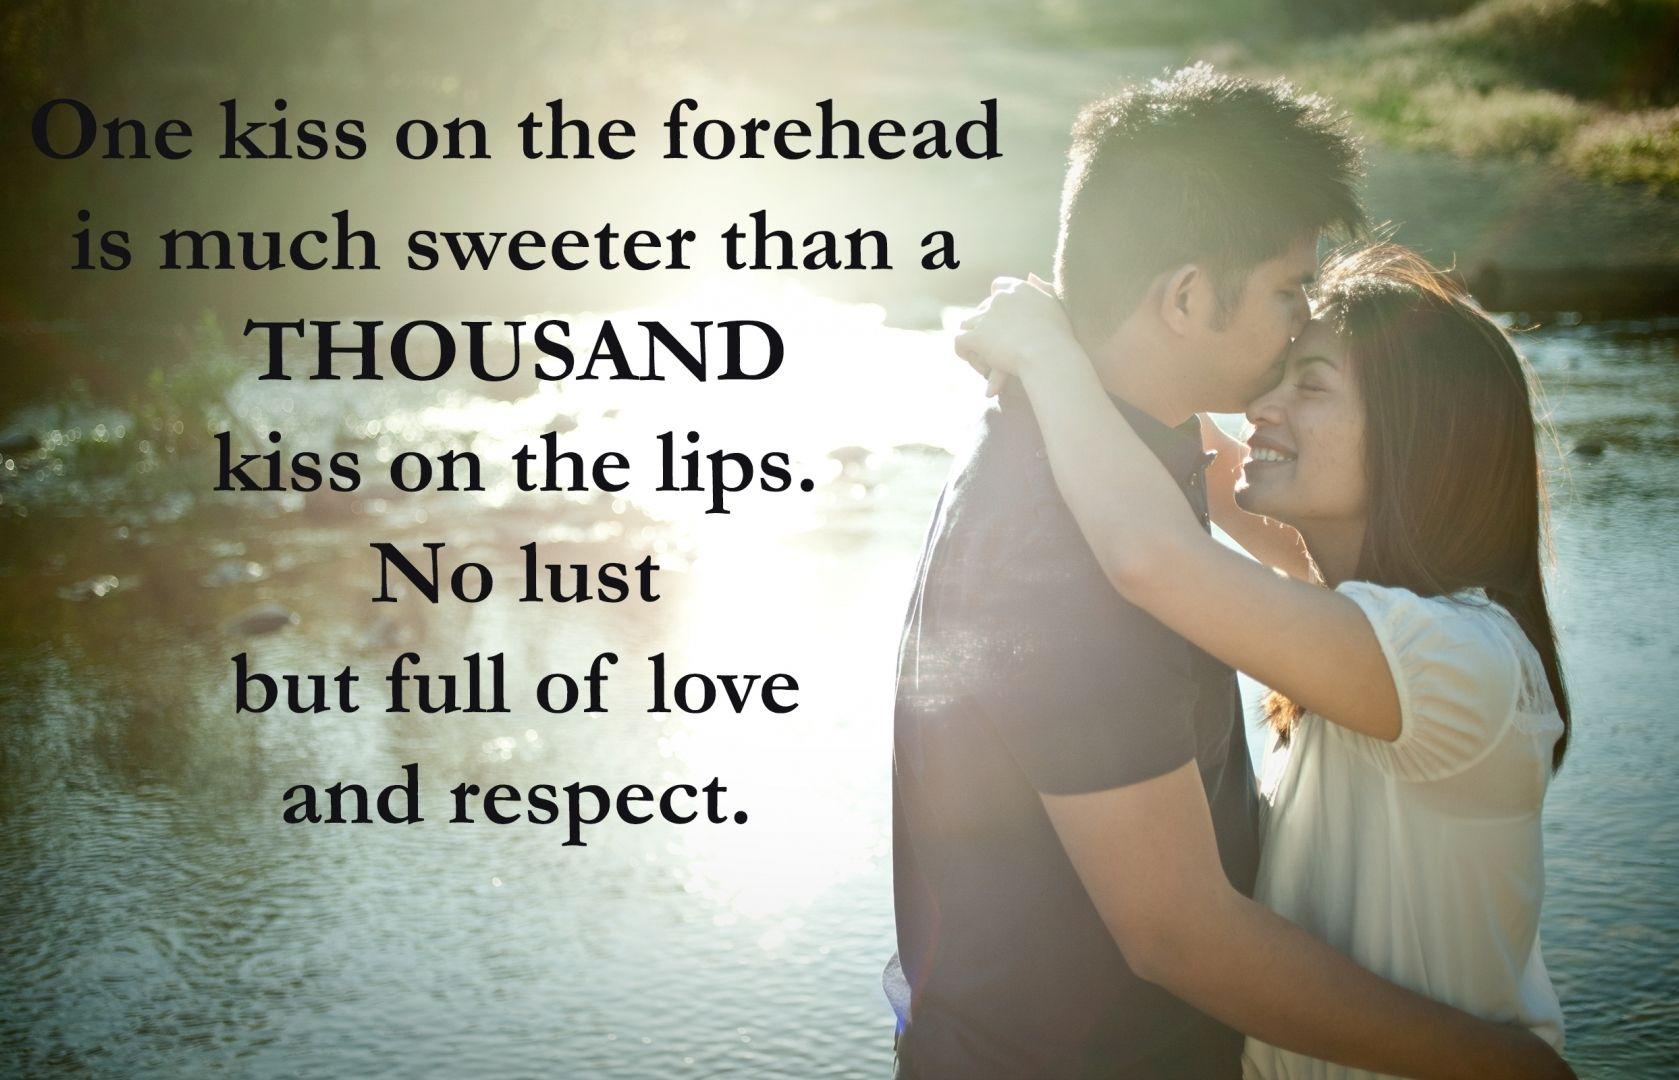 image of kiss day with quotes forehead kiss smile romantic quote